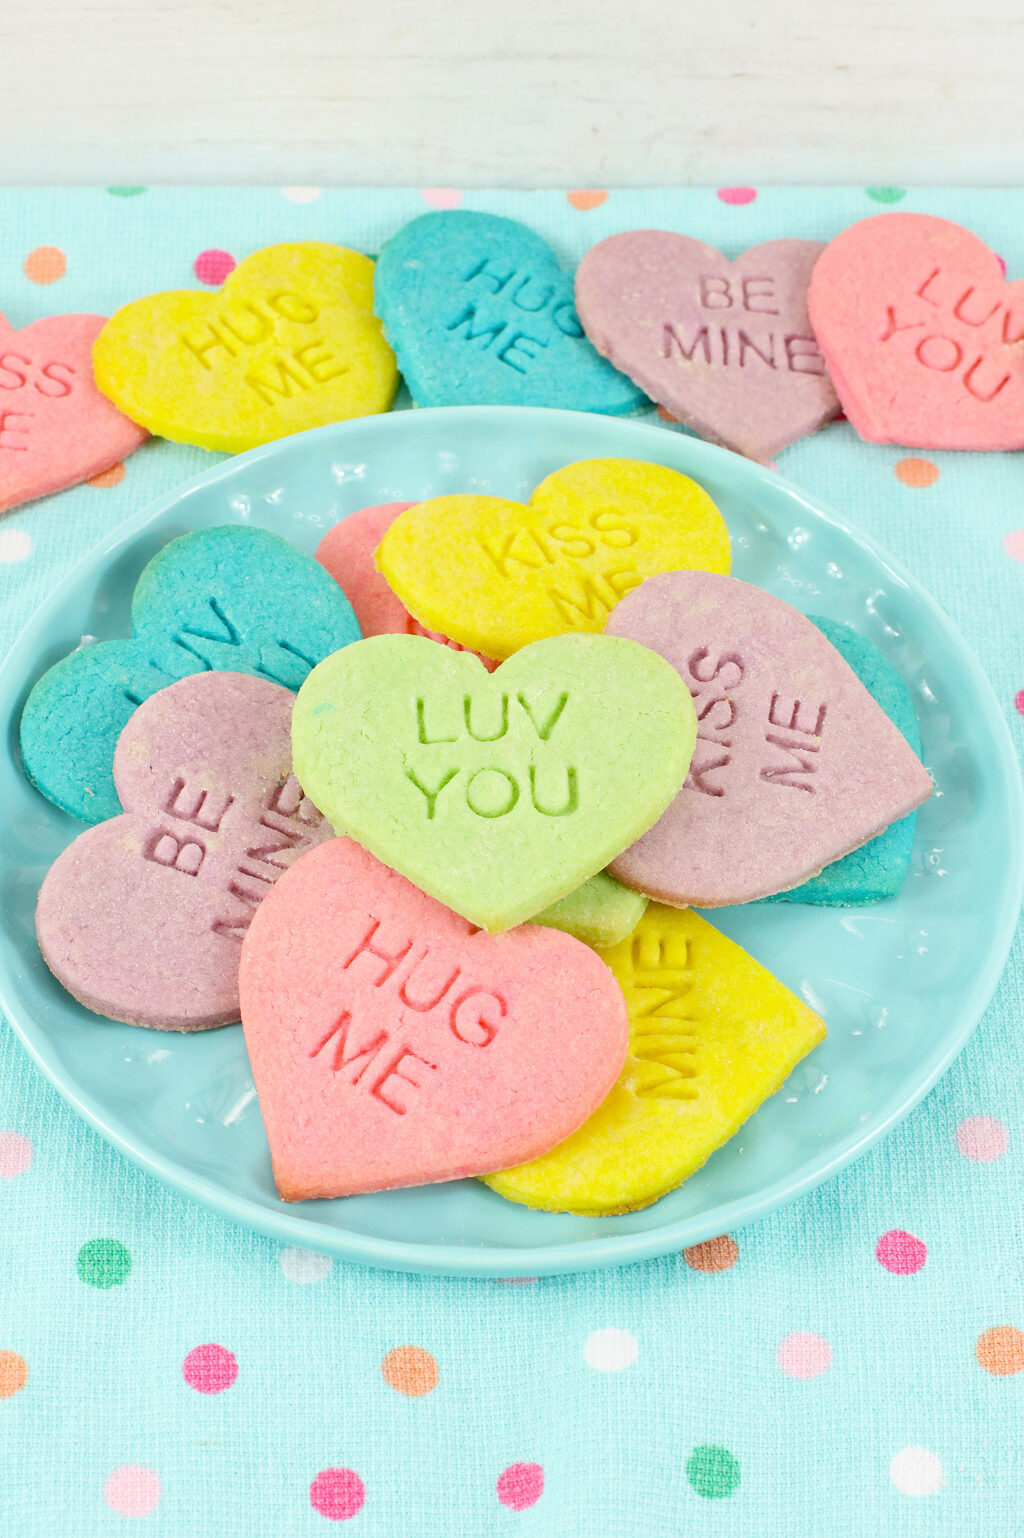 blue plate with colorful conversation heart sugar cookies on it